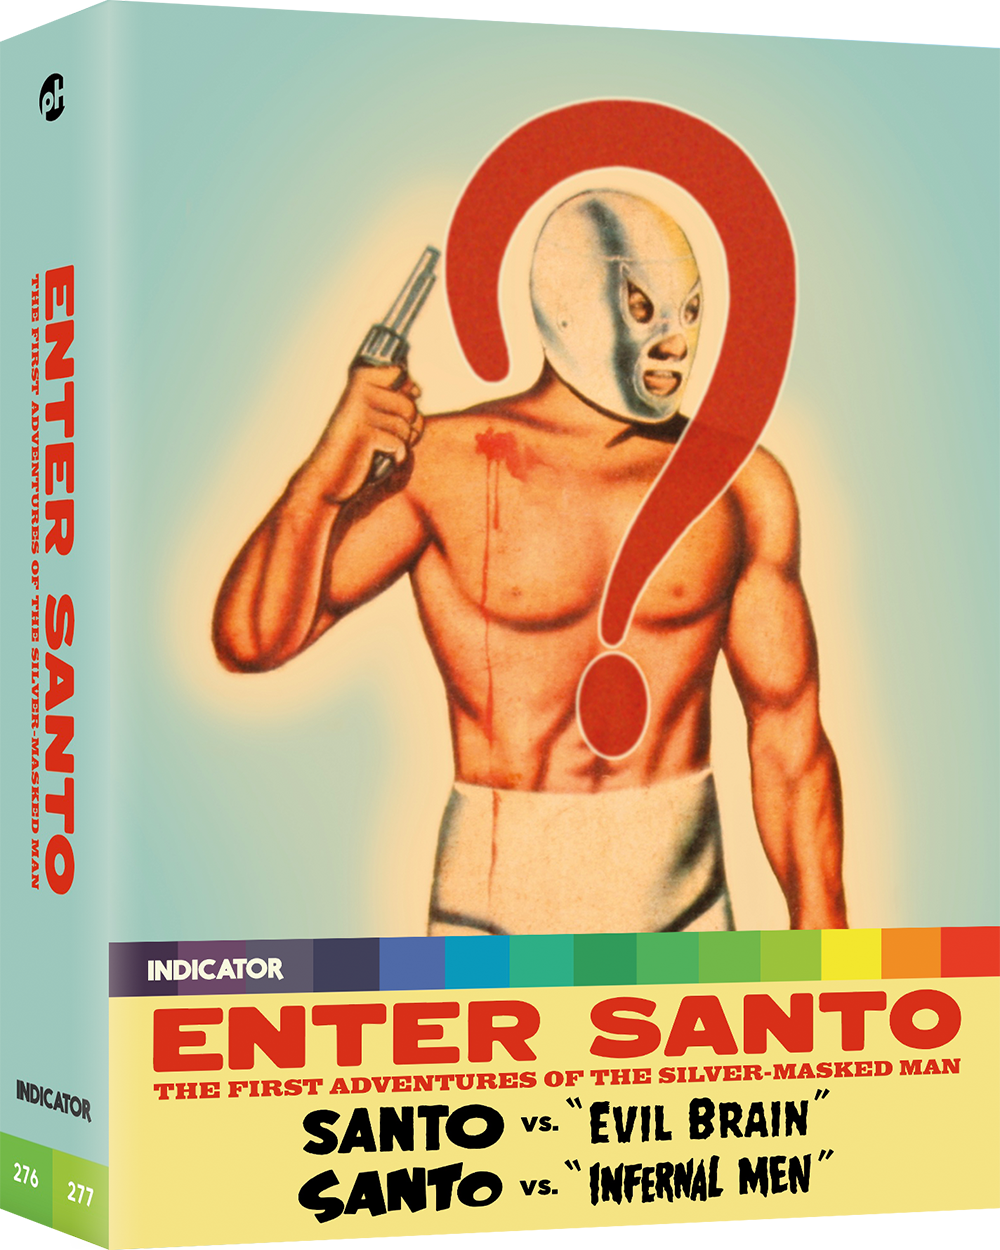 ENTER SANTO: THE FIRST ADVENTURES OF THE SILVER-MASKED MAN - LE